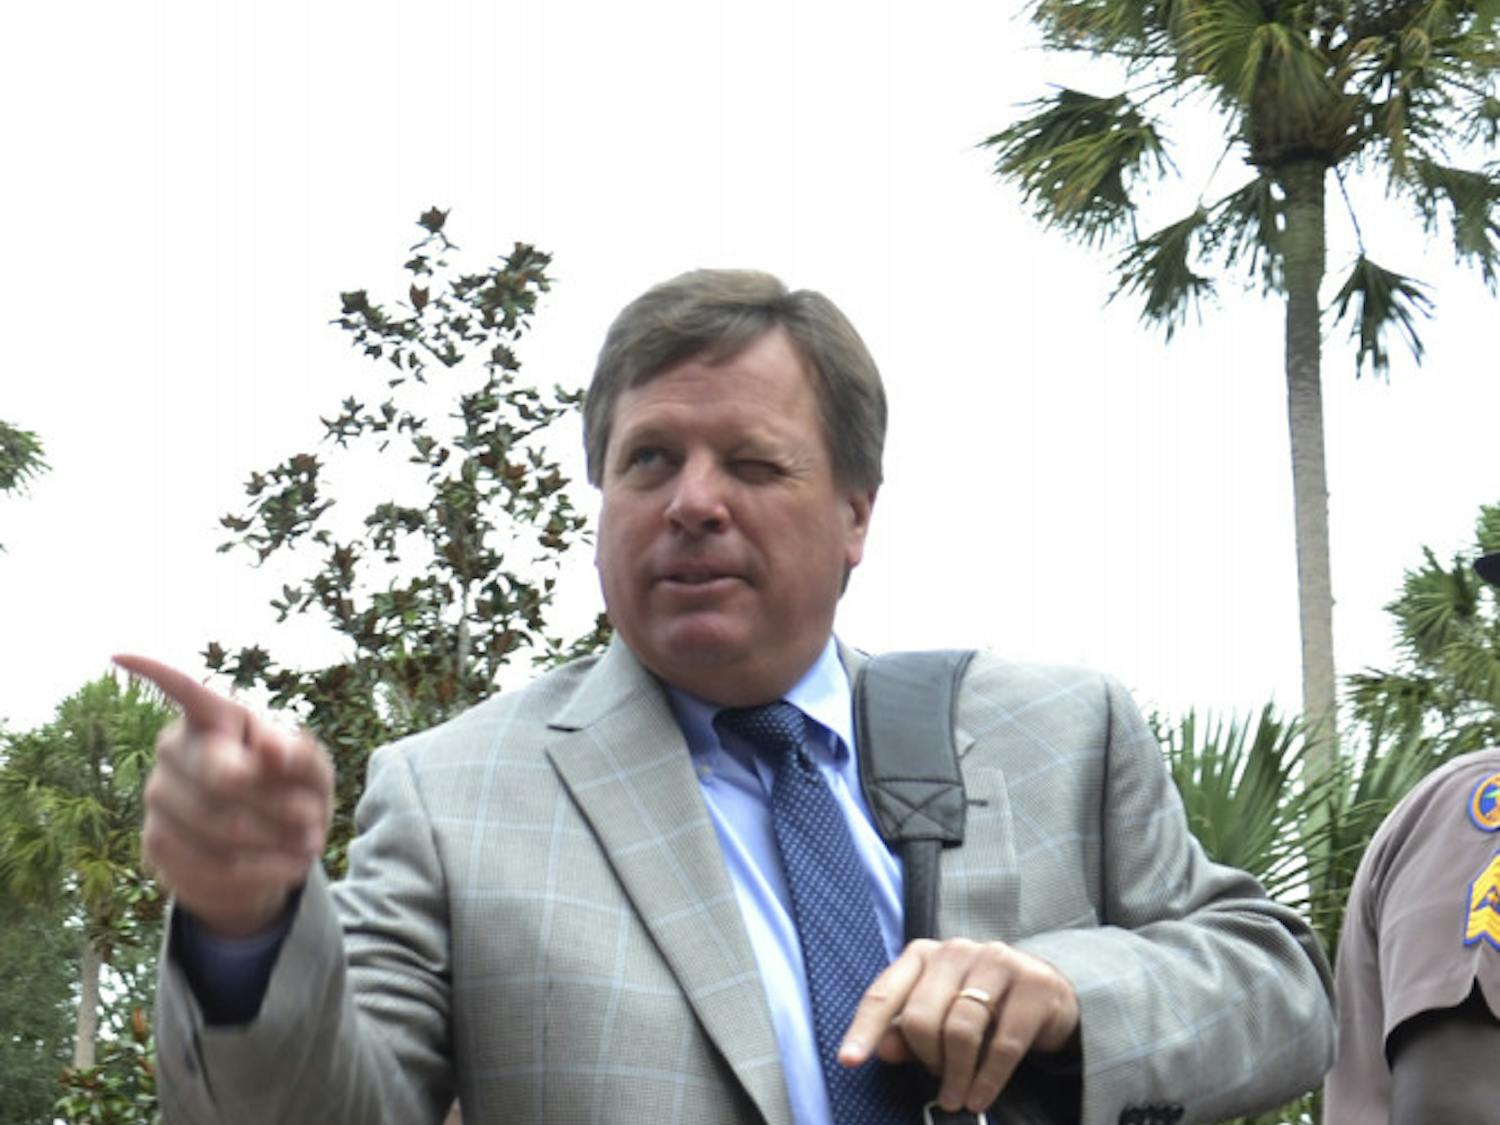 UF coach Jim McElwain points to the crowd during Gator Walk prior to Florida's 20-14 overtime win against Florida Atlantic on Nov. 21, 2015.